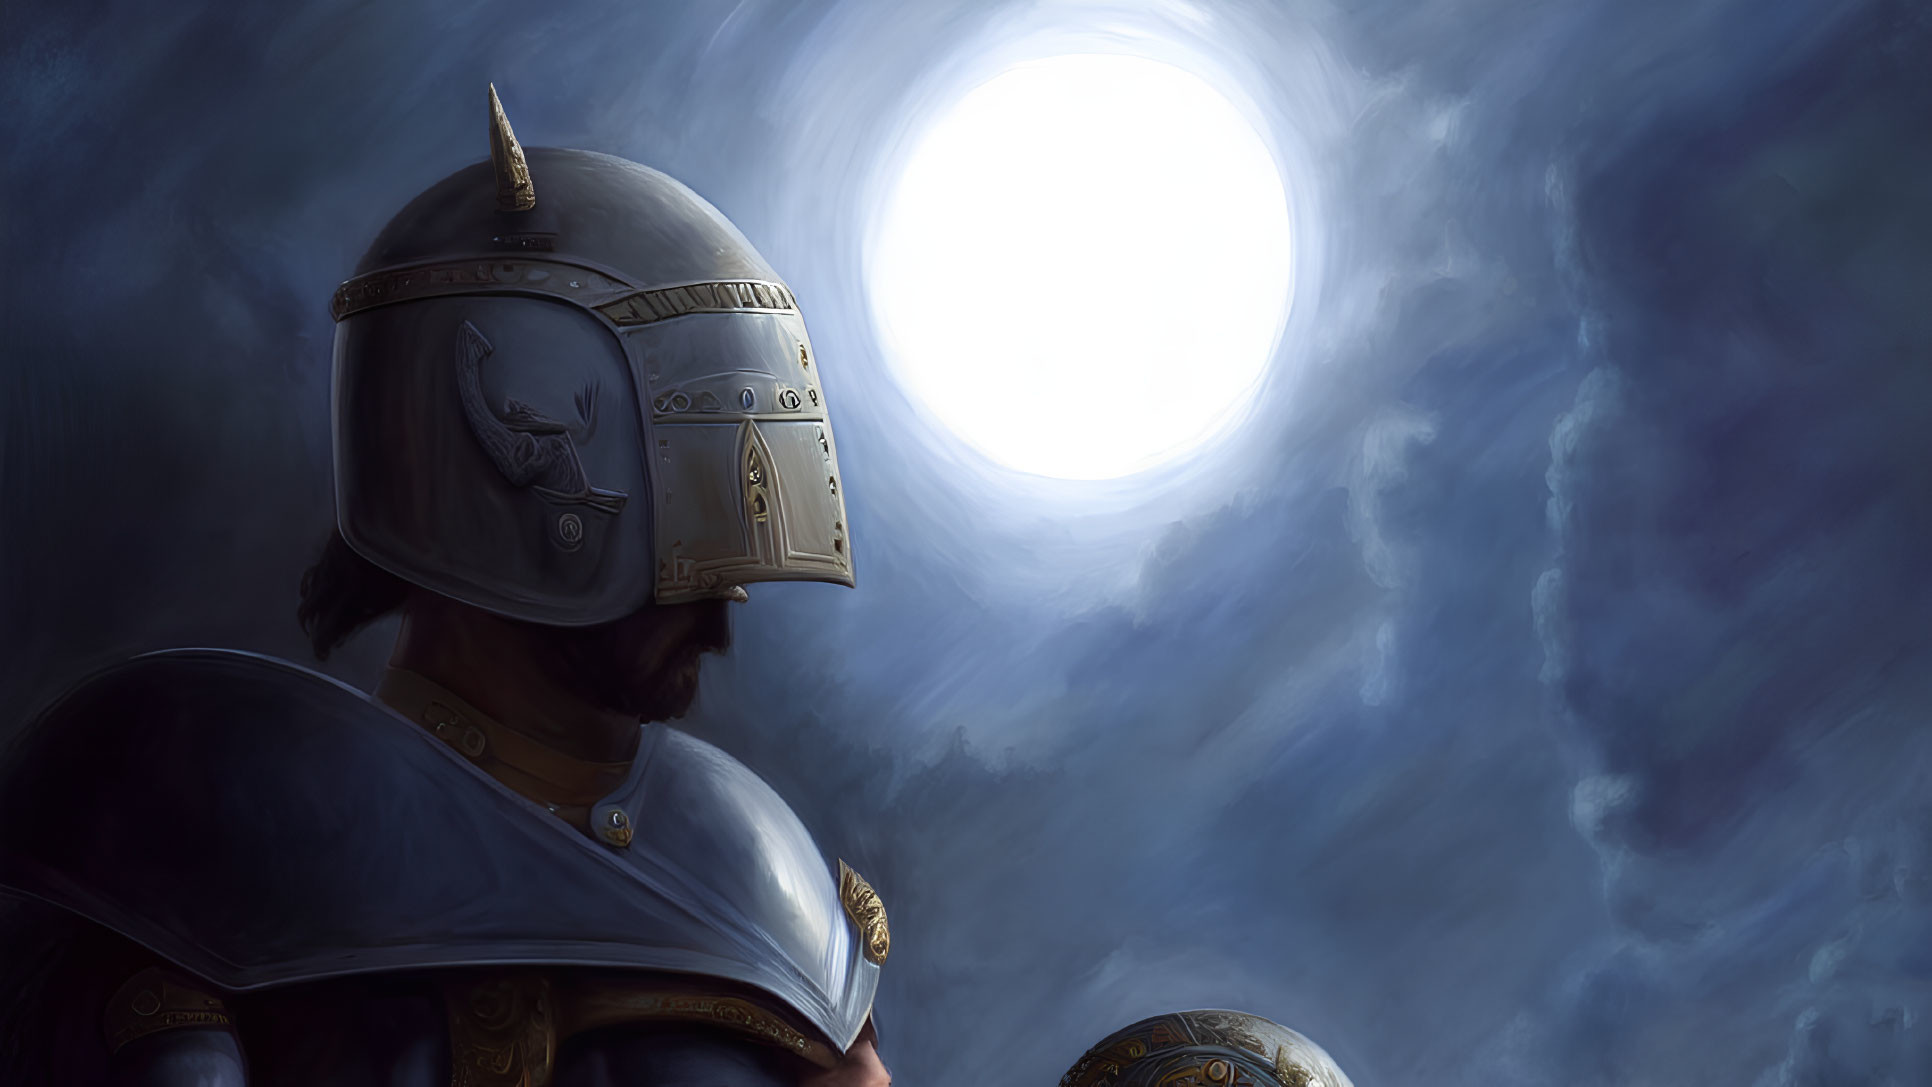 Medieval knight in armor looking at bright light in cloudy sky